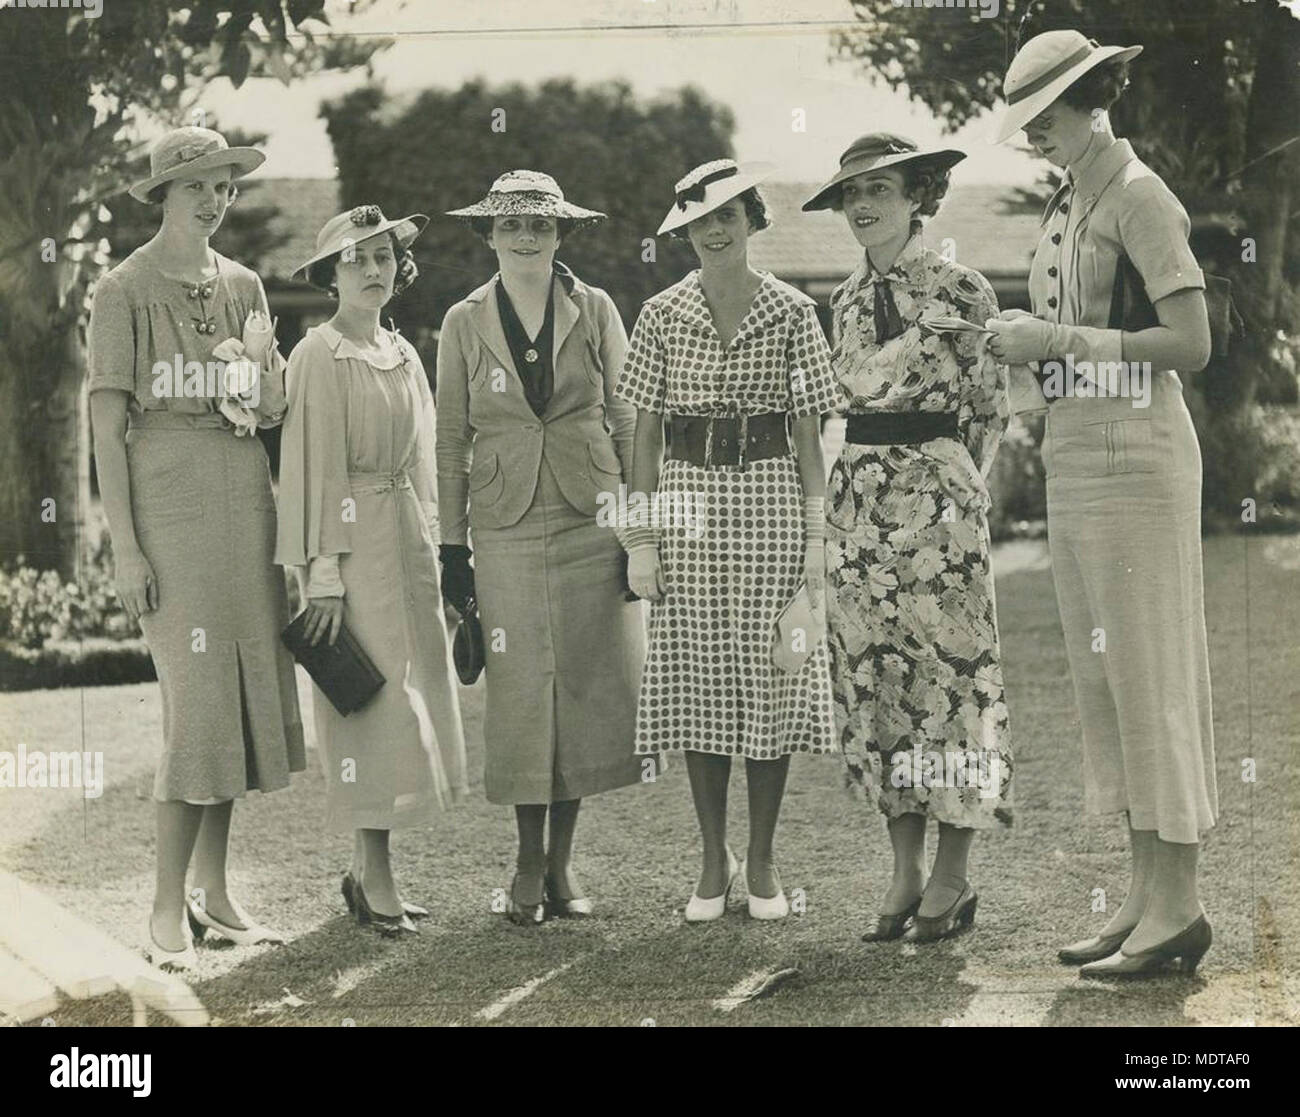 Group of ladies enjoying a day out at the races,. Location:  Brisbane, Queensland, Australia  Date:  Undated  Description:  Six ladies, all wearing smart dresses and wide-brimmed hats, are gathered on the lawn at the races. Stock Photo